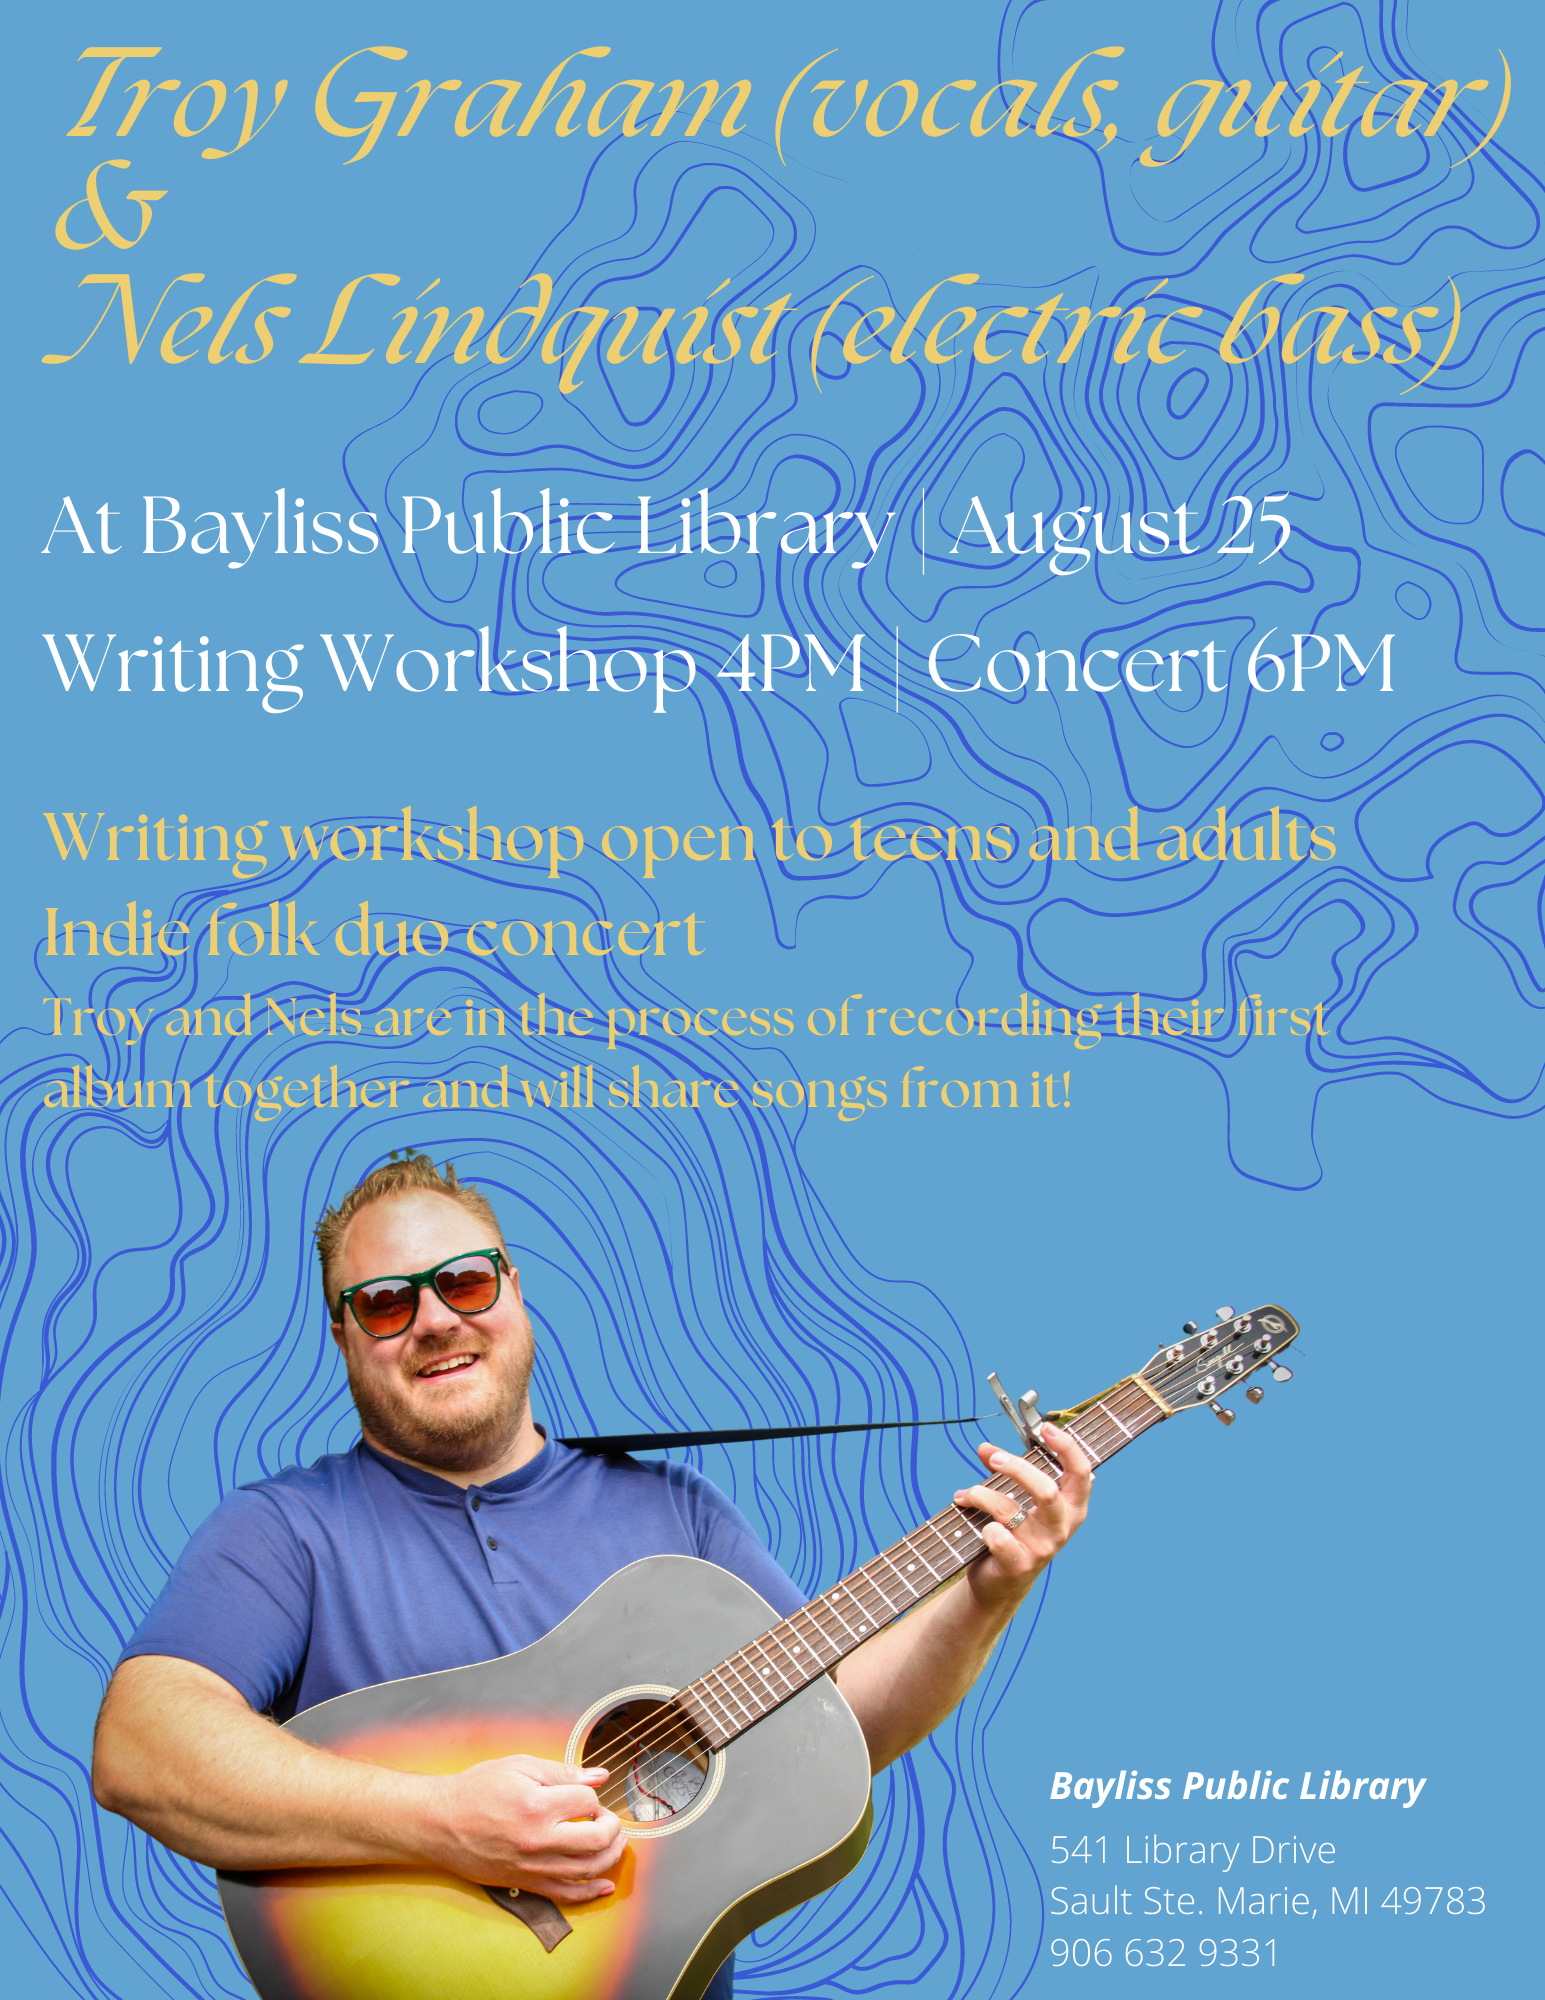 Troy graham at bayliss public library